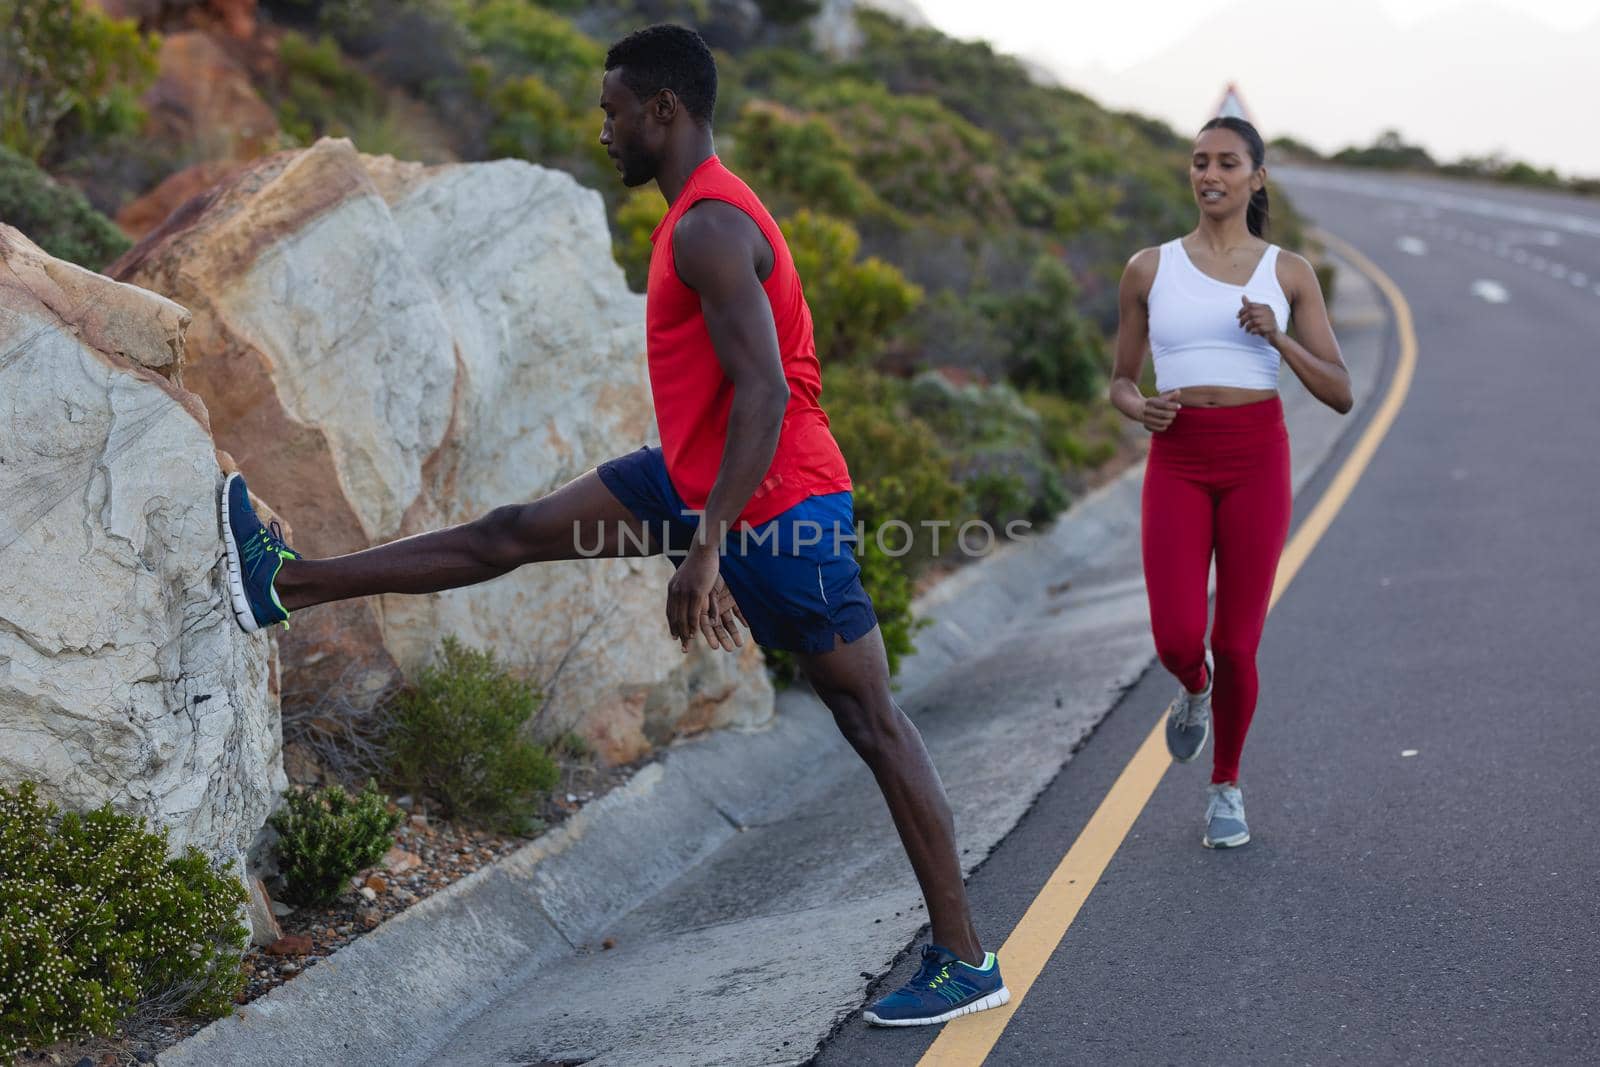 Fit african american man in sportswear stretching while woman is running on a coastal road. healthy lifestyle, exercising in nature.